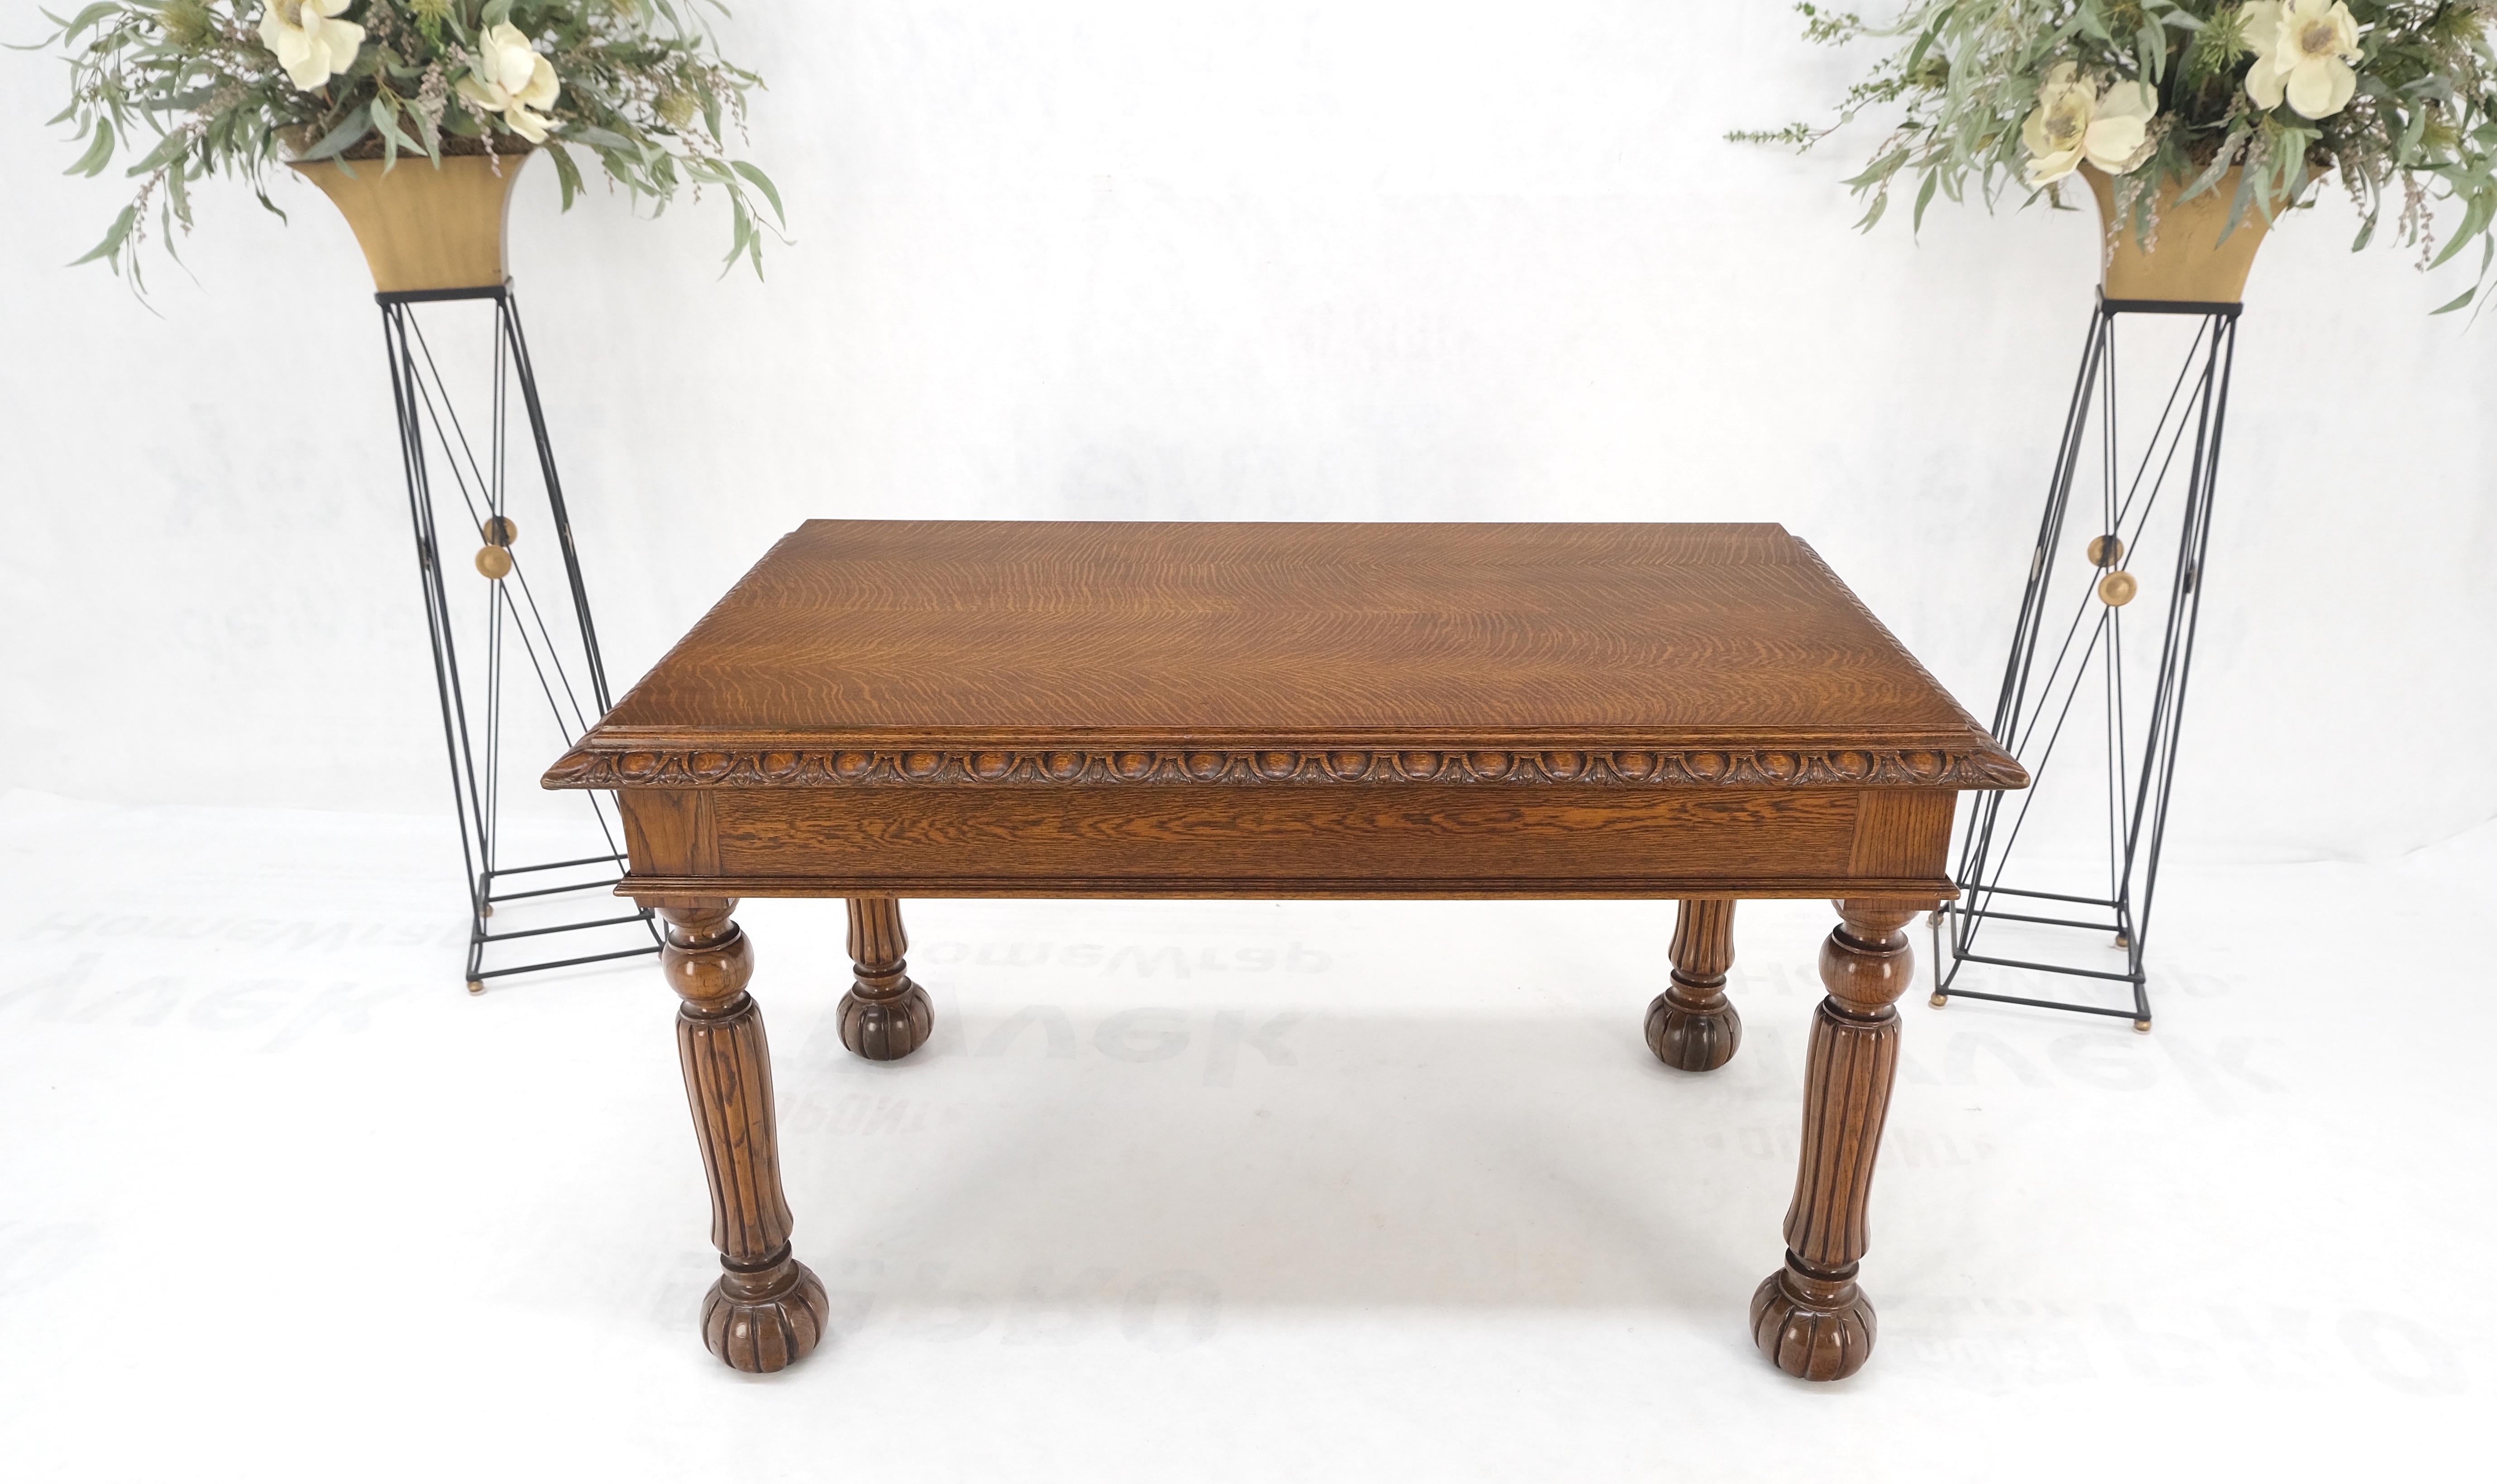 Heavy Fluted Carved Oak Legs 1 Drawer arts & Crafts Desk Writing Table CLEAN!
Carved edge unusual pumking shape feet.